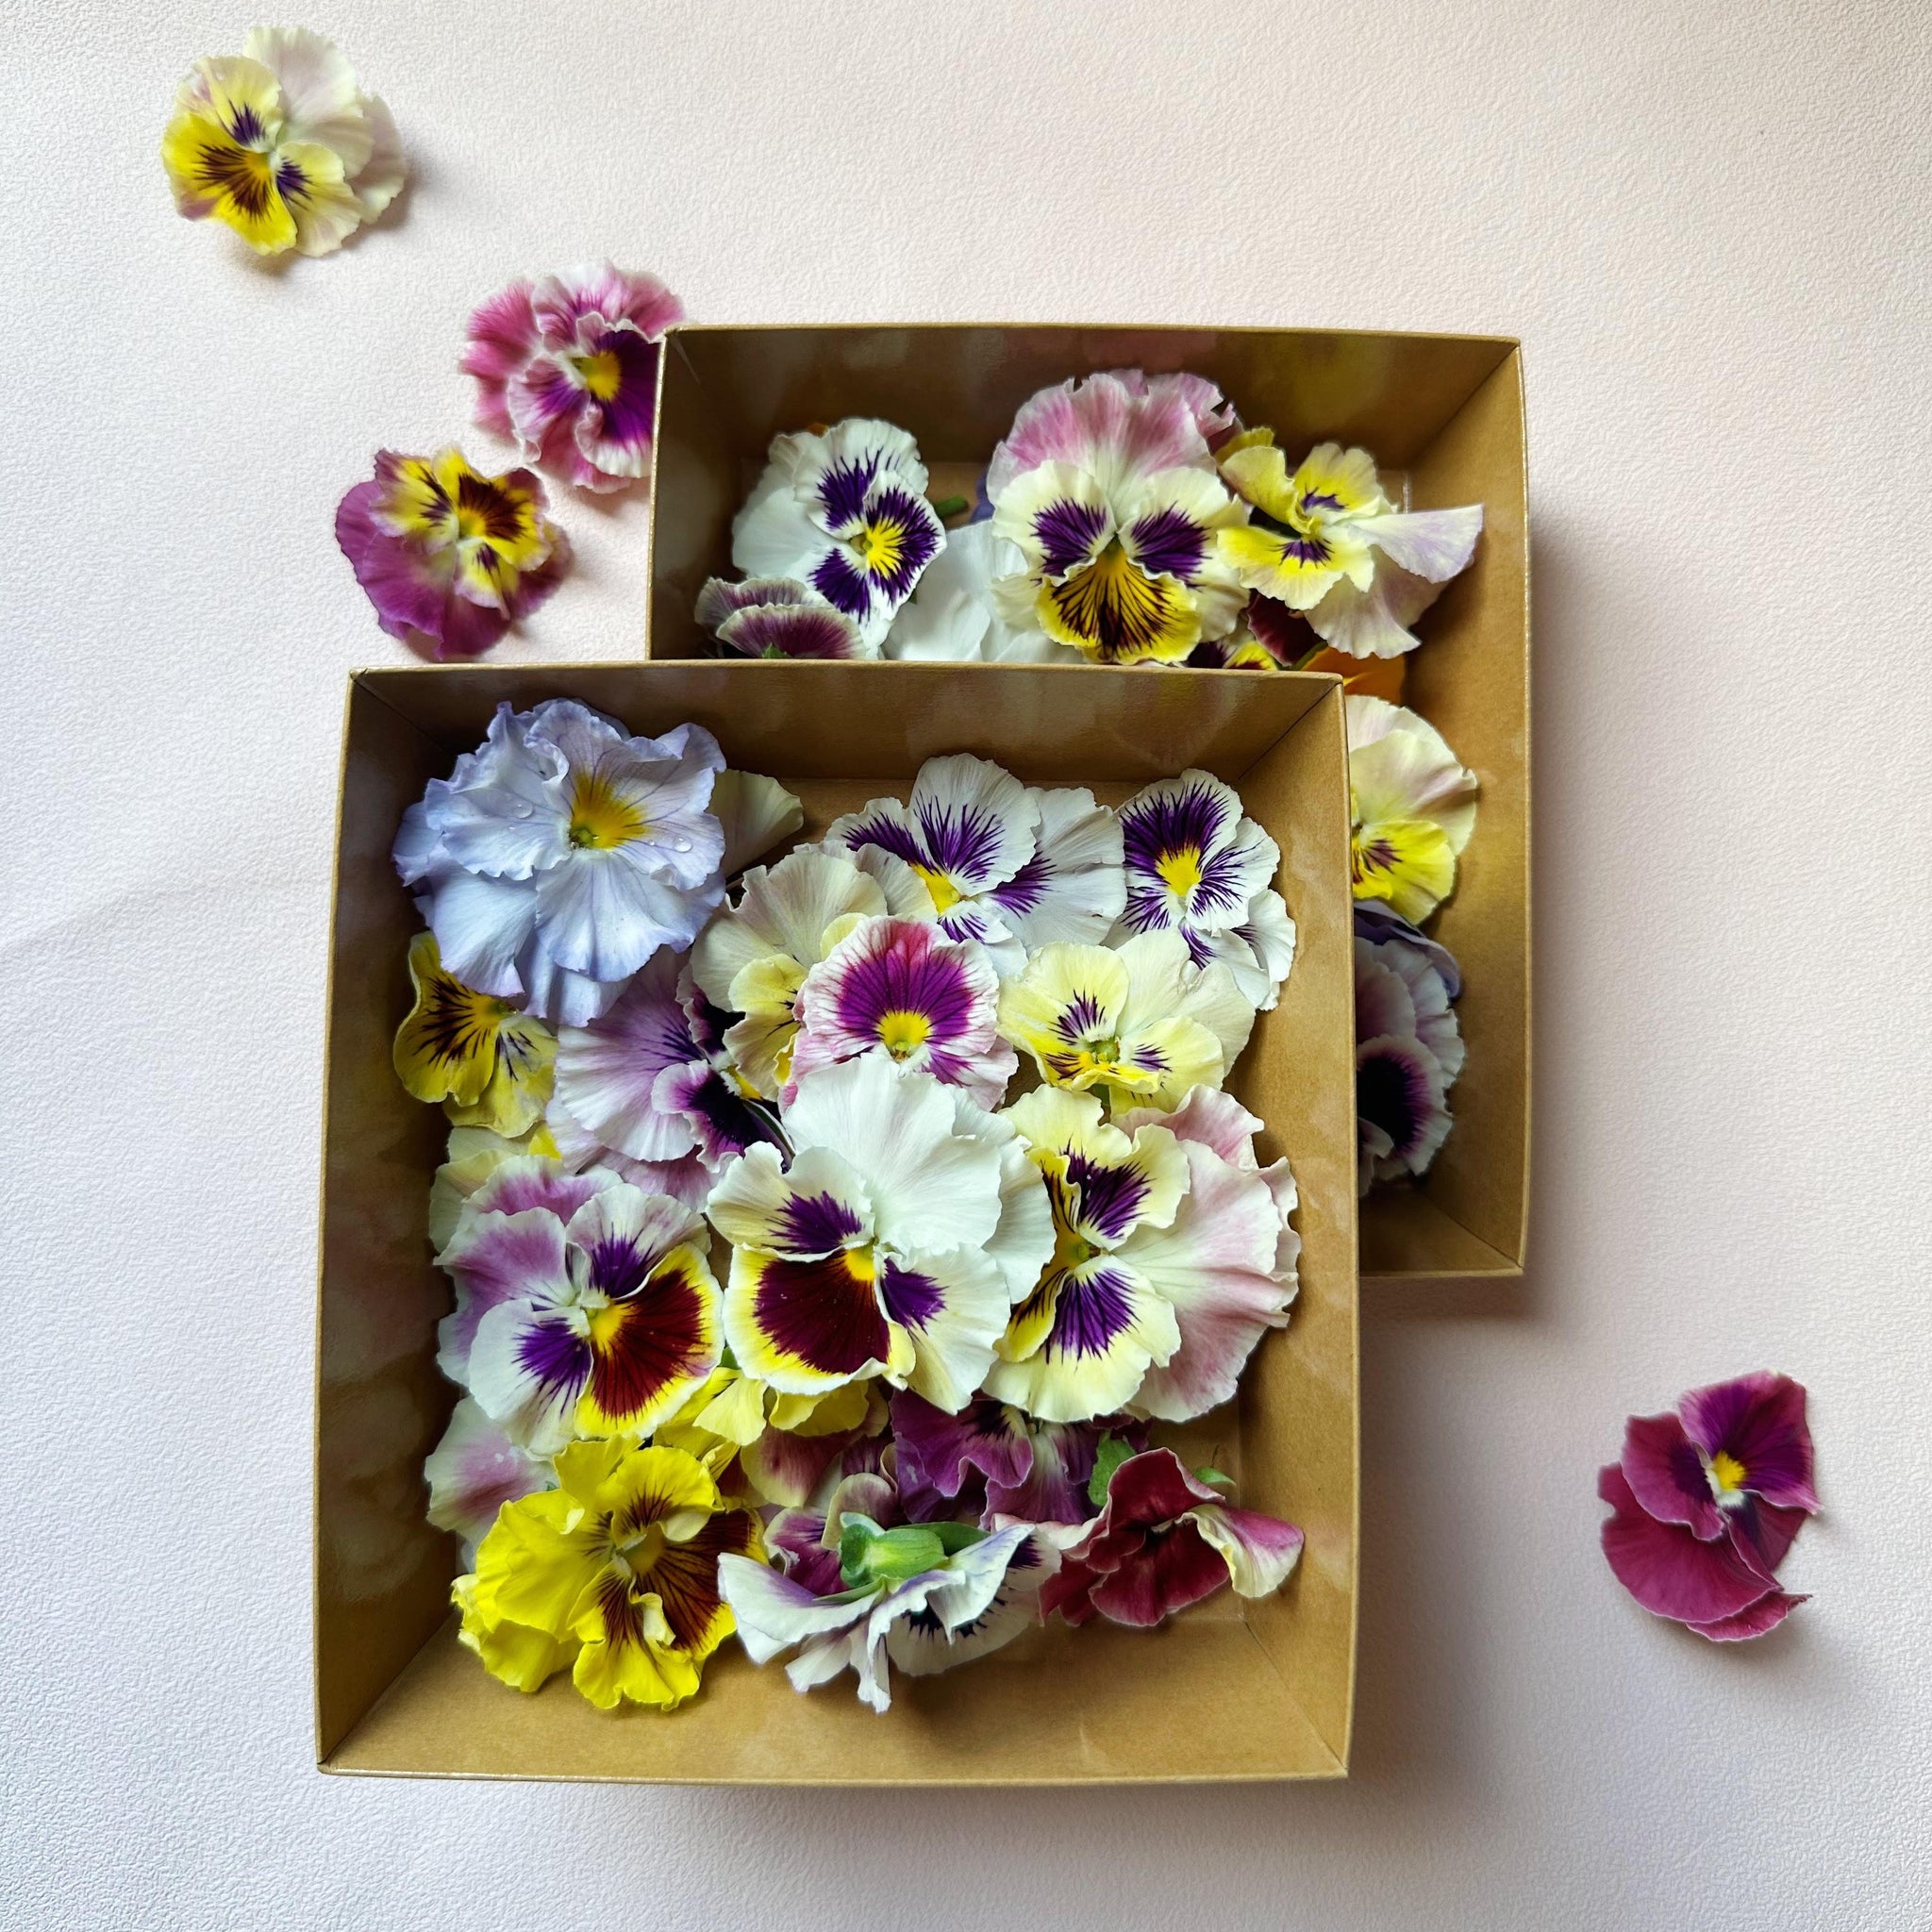 Pressed Pansy Edible Flowers, Edible Flower Decorations